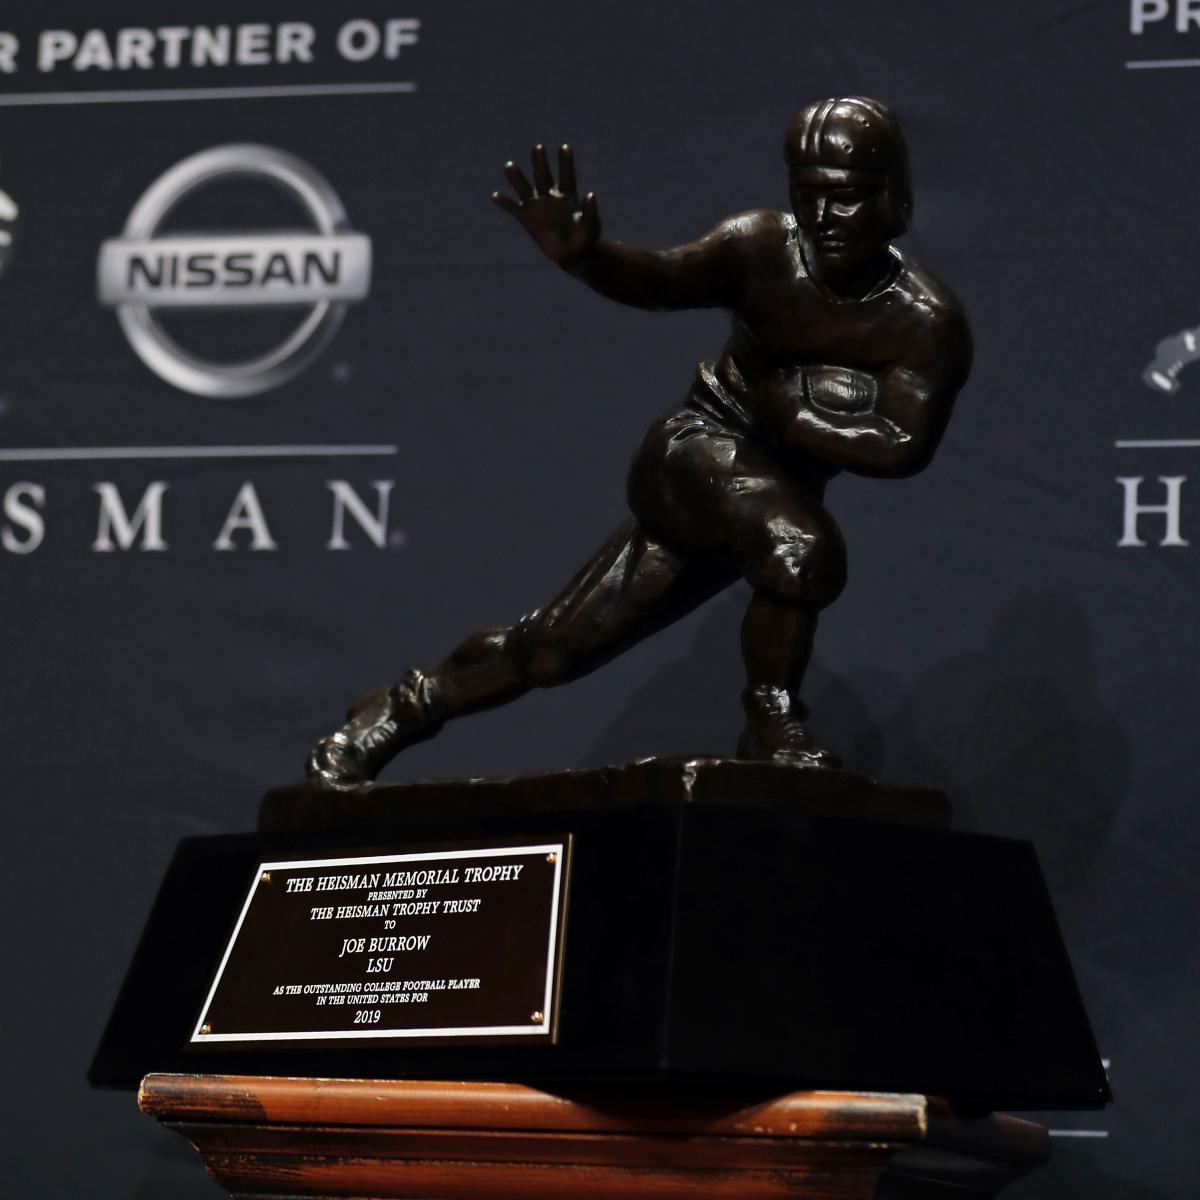 Former USC RB O.J. Simpson's stolen Heisman trophy recovered 20 years later  - Sports Illustrated